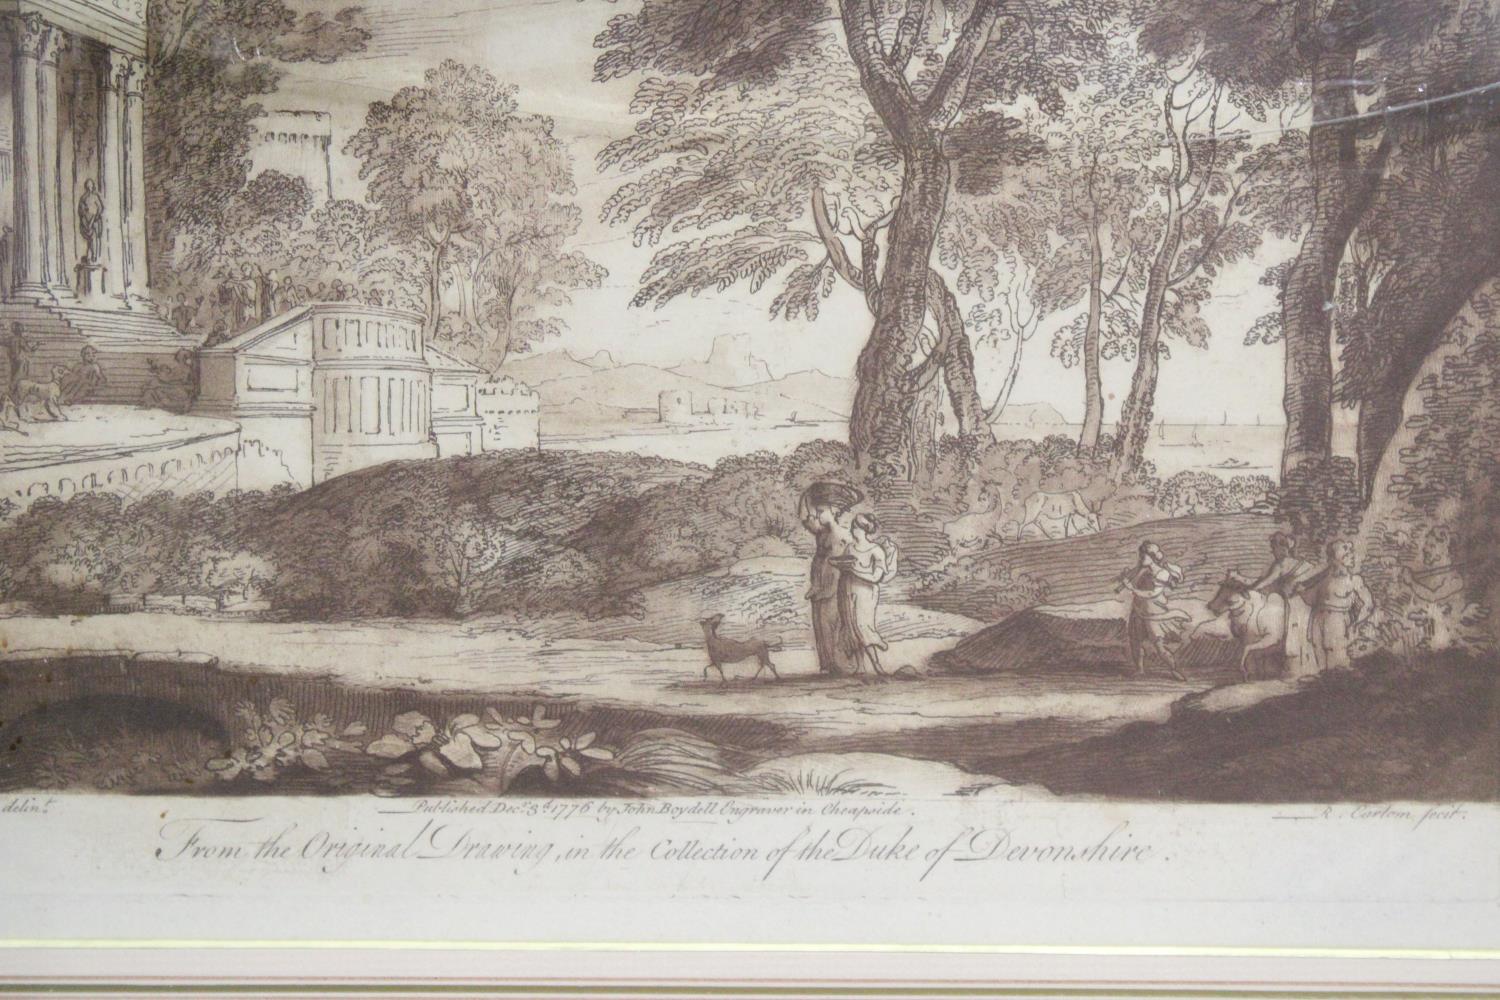 TWO VINTAGE FRAMED PRINTS TAKEN FROM THE ORIGINAL DRAWING, IN THE COLLECTION OF THE DUKE OF - Image 4 of 6